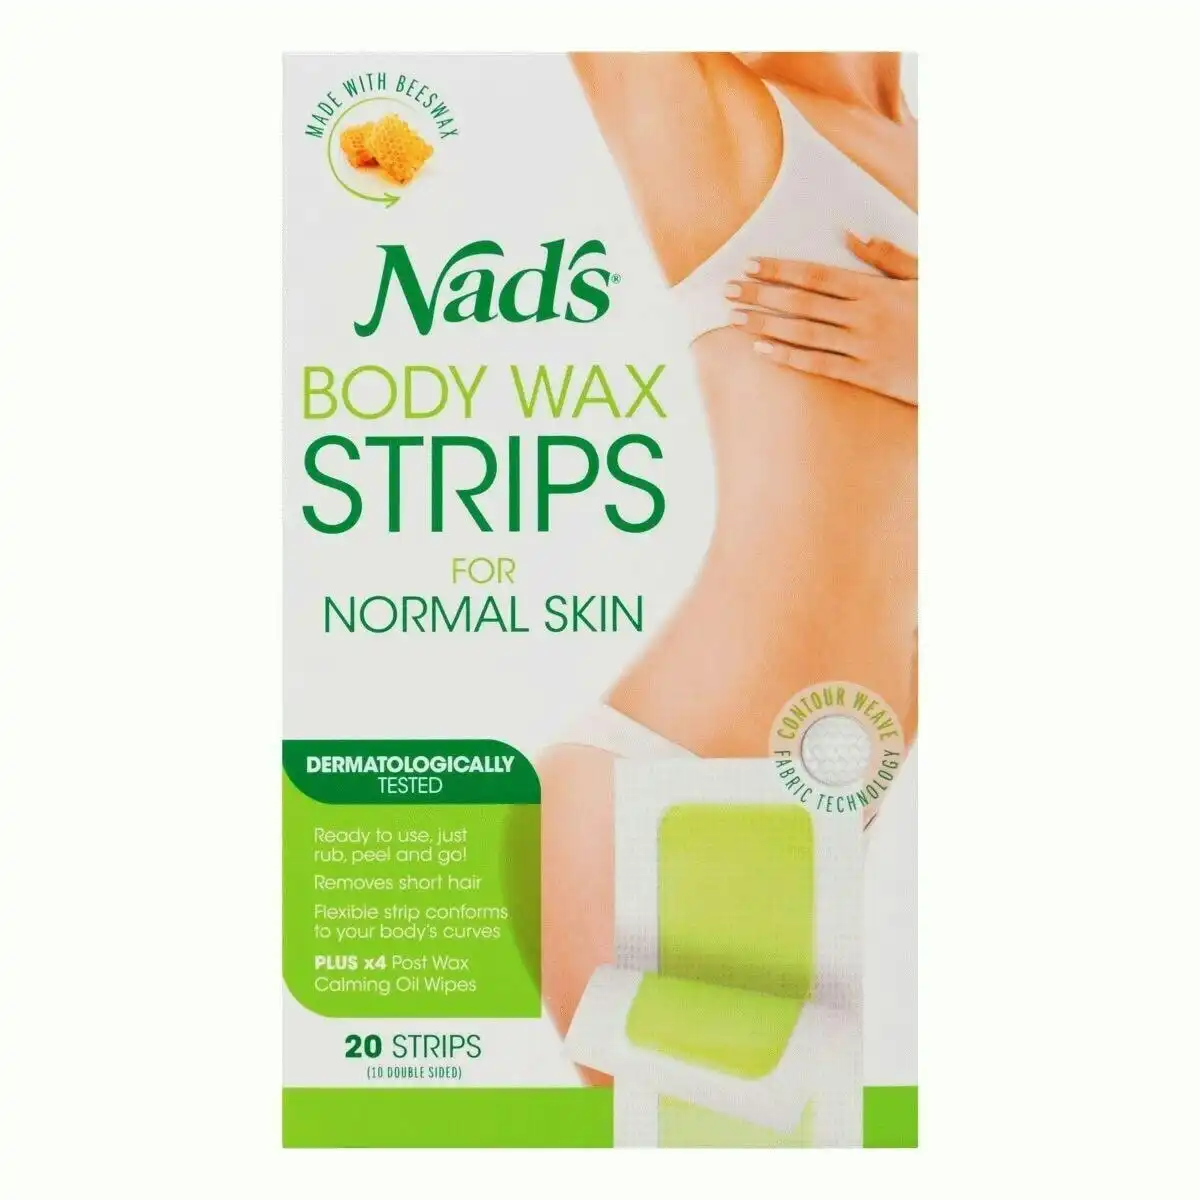 Nads Nad's Body Strips Large Pk 20 Wax For Normal Skin   X Hair Rem Strip Women